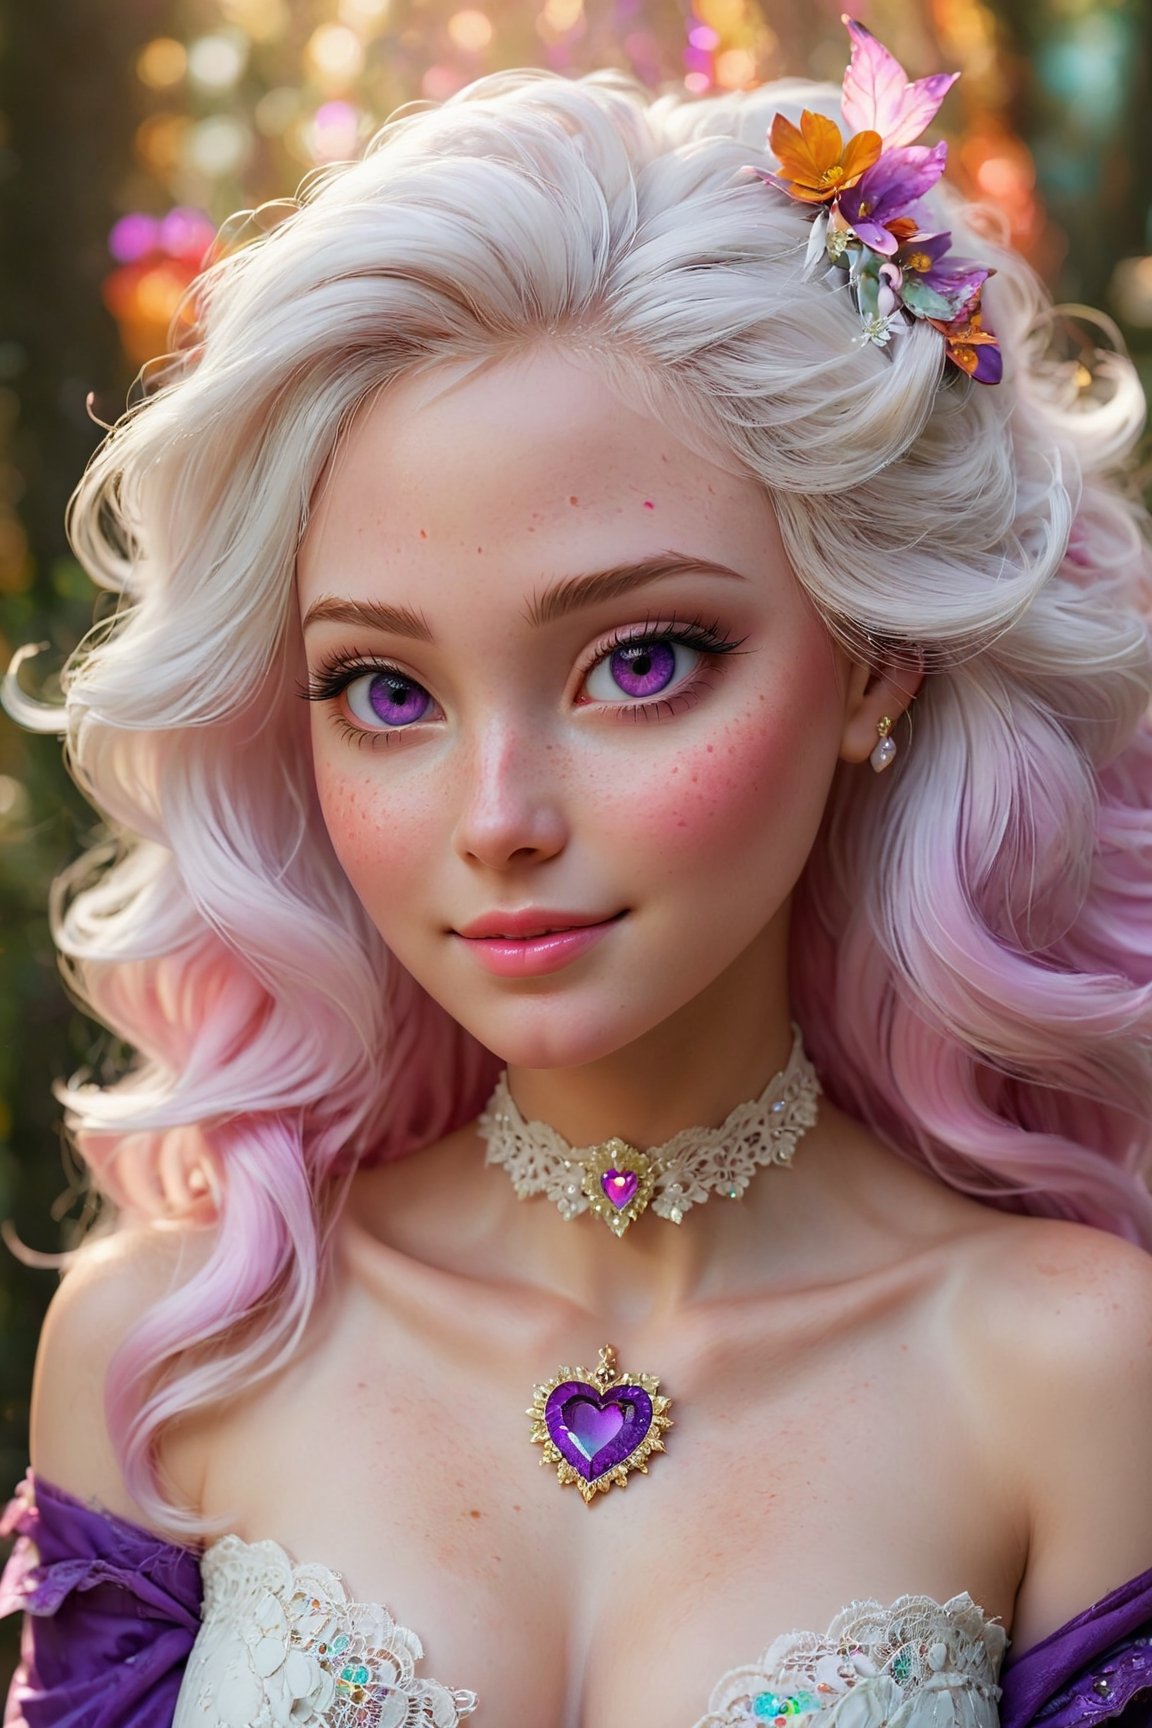 (best quality,8K,highres,masterpiece), ultra-detailed, (fantasy creature, super colorful), featuring a mesmerizing being with heart-shaped pupils, ethereal white hair, and enchanting purple eyes. Their cheeks are adorned with a gentle blush (blush:1.1), and they wear a captivating choker around their elegant neck. The upper body of this fantastical creature is adorned with a shimmering crop top that radiates love and happiness. A cheerful smile graces their face as they emanate an aura of joy and enchantment. Their lace attire and surroundings are a dazzling tapestry of vibrant colors and bokeh, creating a dreamlike atmosphere. Freckles (freckles:0.8) adorn their natural skin texture, adding a touch of uniqueness to their portrait. The scene is an explosion of fantastical hues, making this creature a living embodiment of a vivid and magical world.